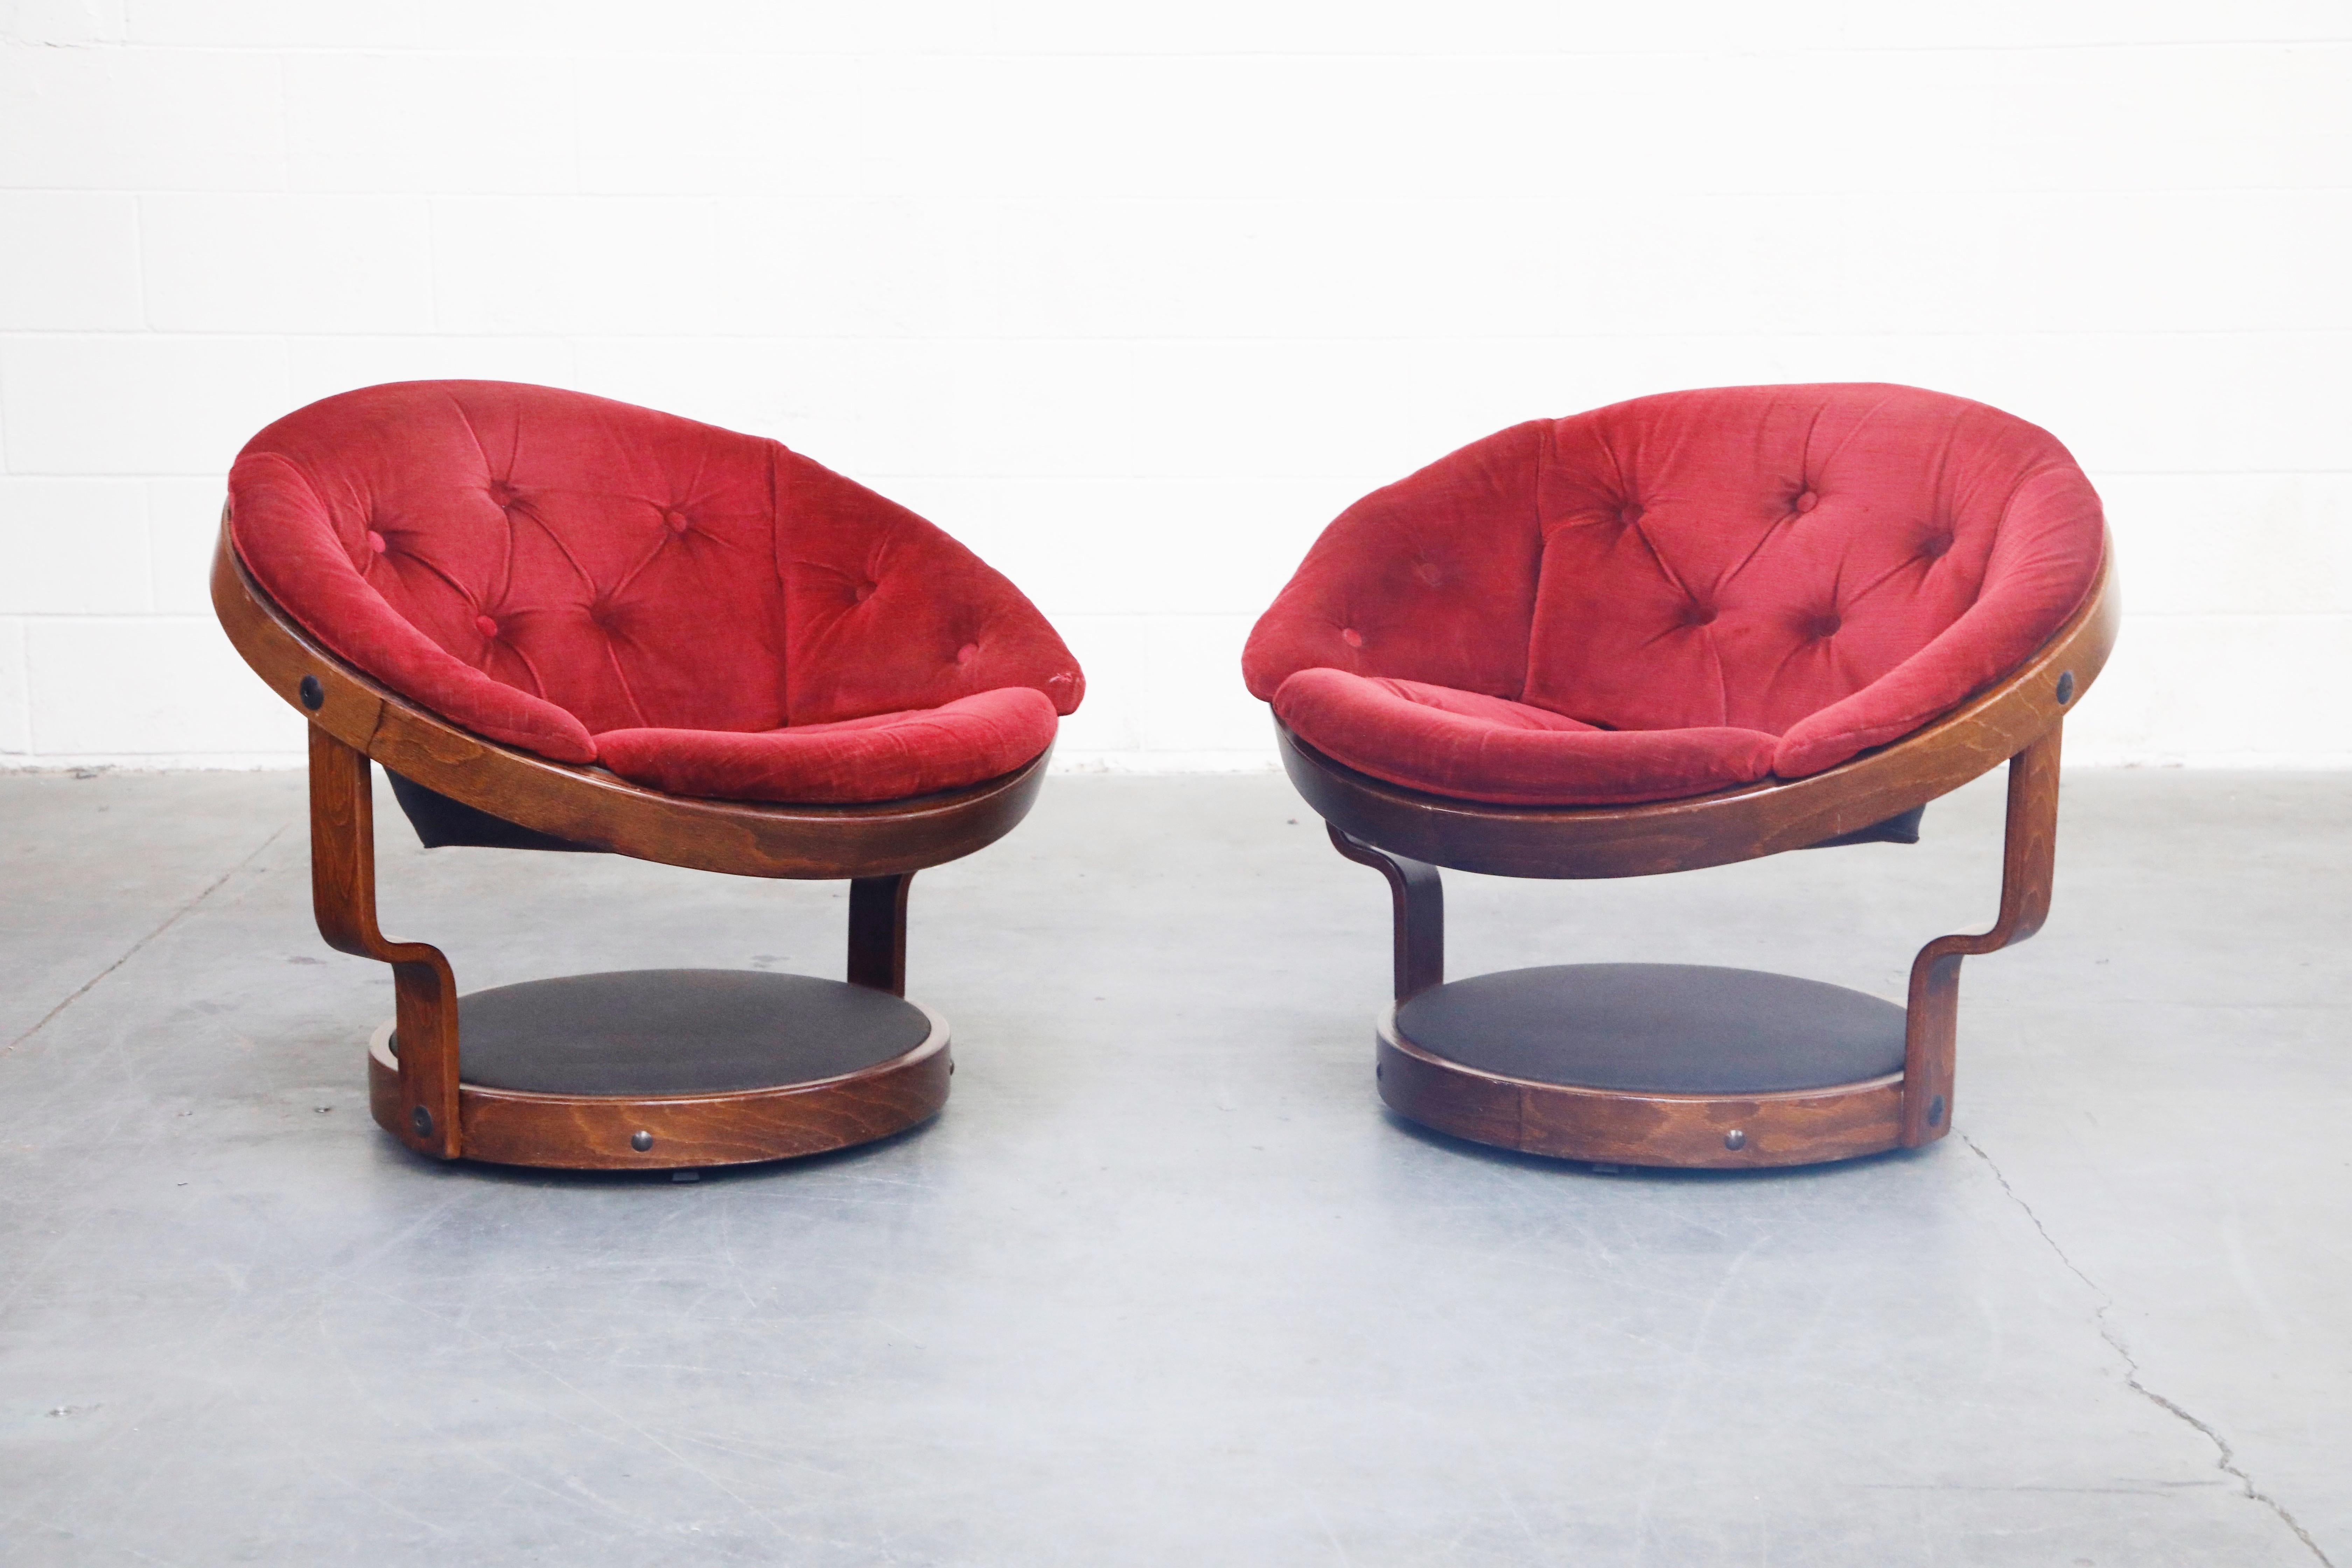 This beautiful pair of swivel lounge chairs by Oddmund Vad for VAD Trevarefabrikk, featuring a floating circular bentwood frame and red soft fabric tufted cushions. Signed under the base with labels, as see in photographs. This rare 1970s design is